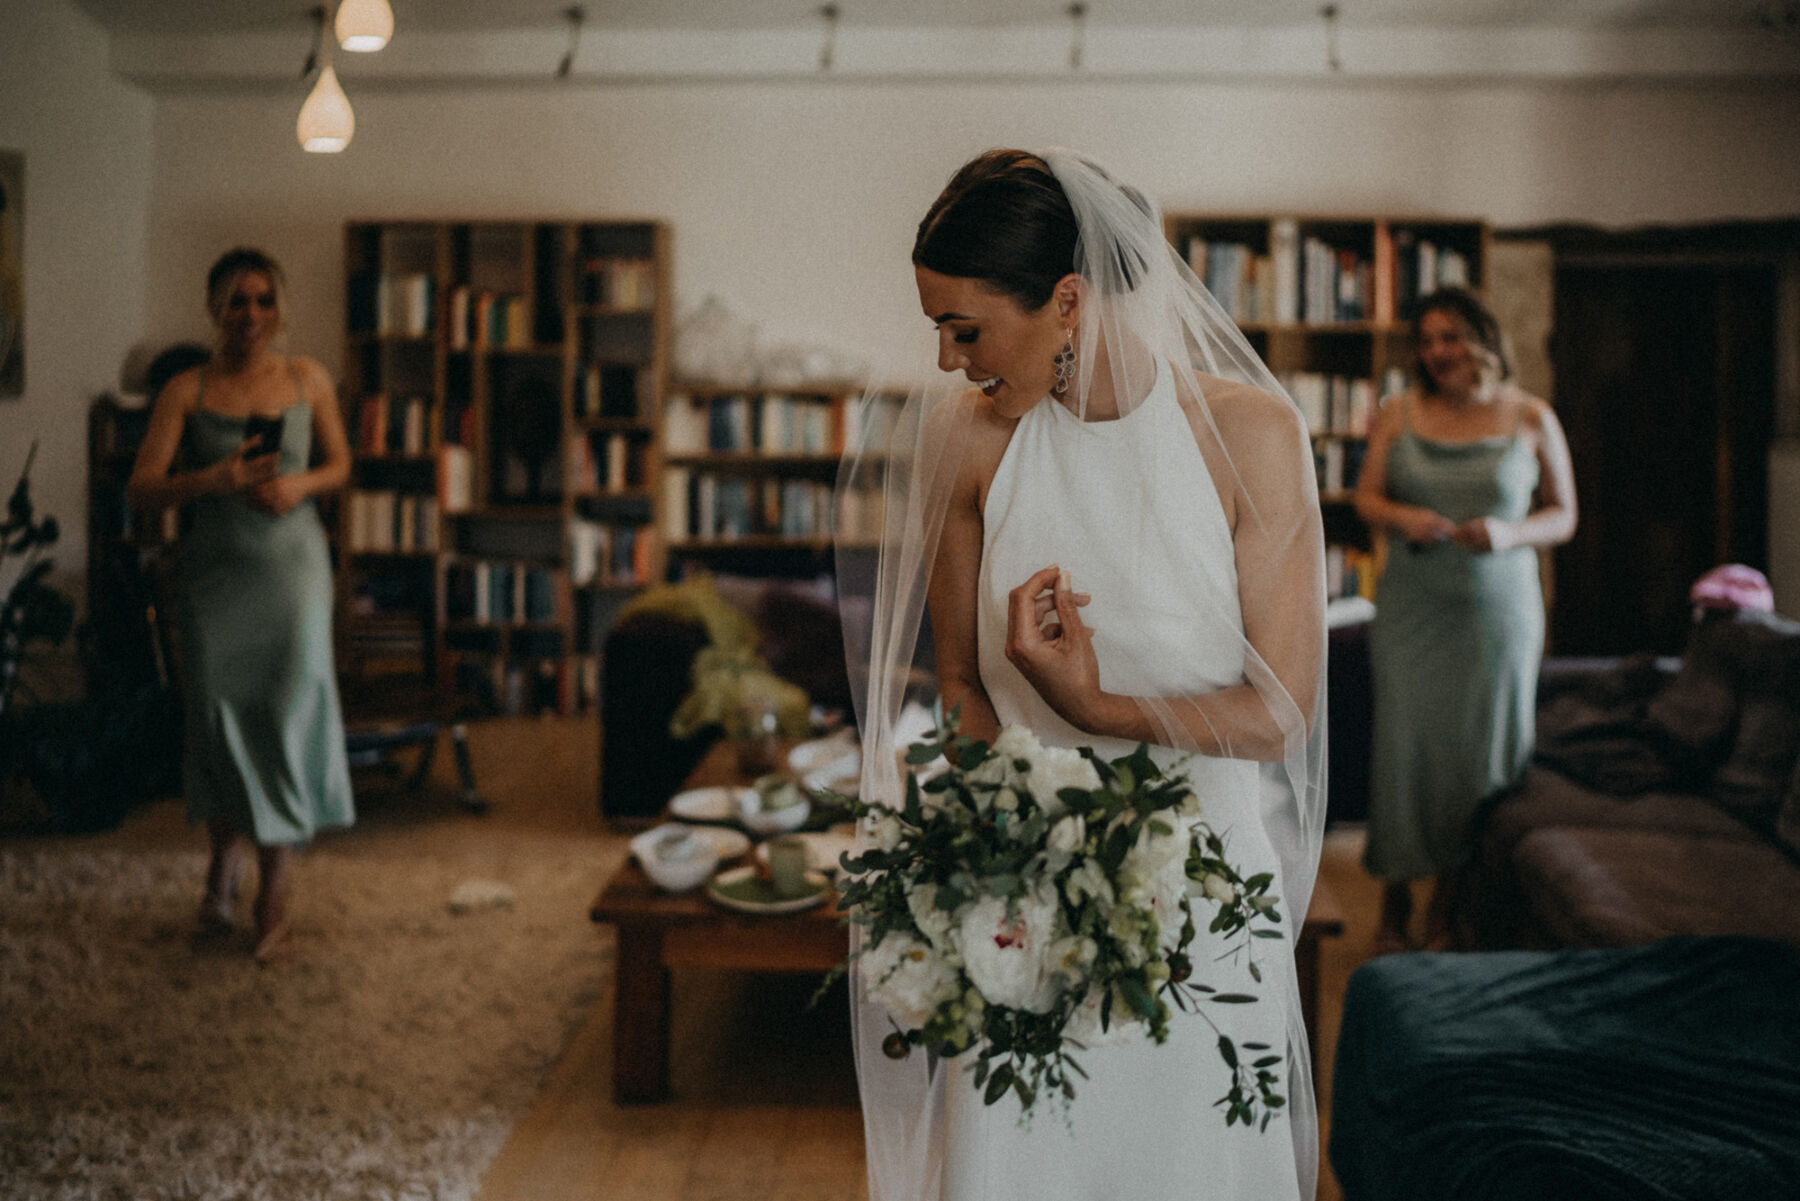 Bride in a halterneck wedding dress and embroidered veil carrying a white and green bouquet.